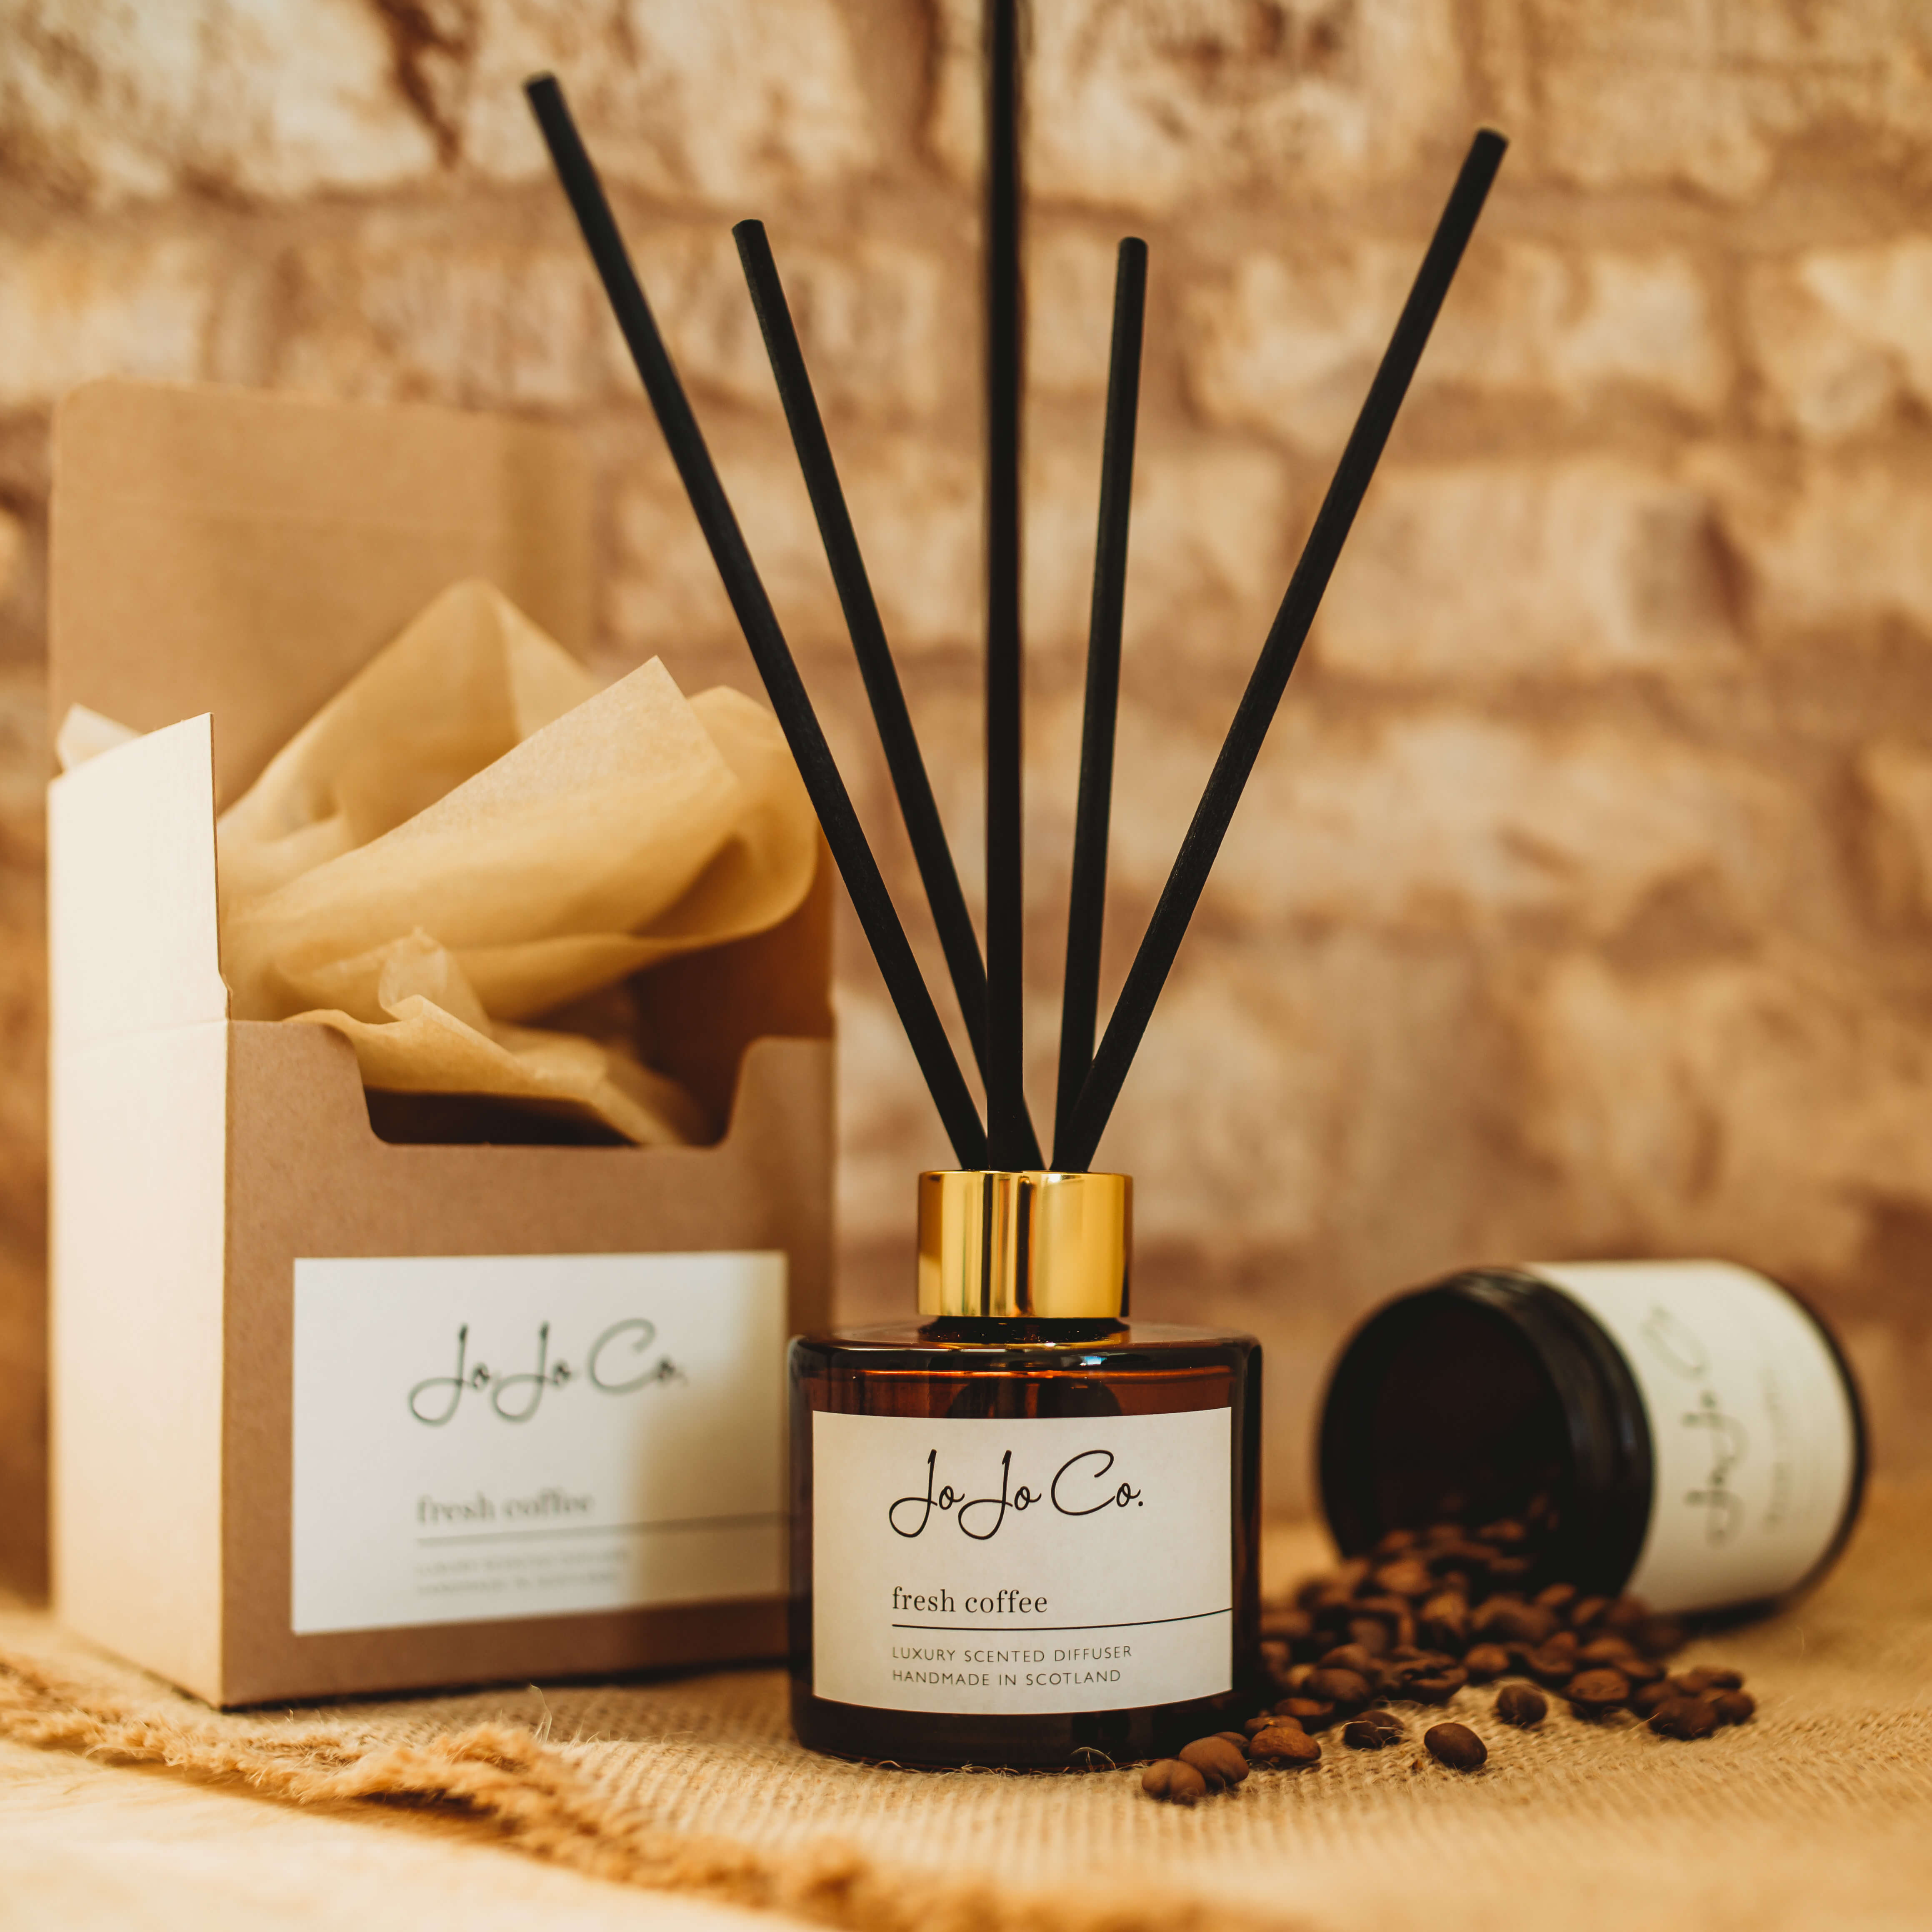 An amber glass jar diffuser with a white JoJo Co. label and gold lid and black reeds sits beside a pretty gift box with tissue paper and a dark jar spilling coffee beans. The label reads JoJo Co. Fresh Coffee